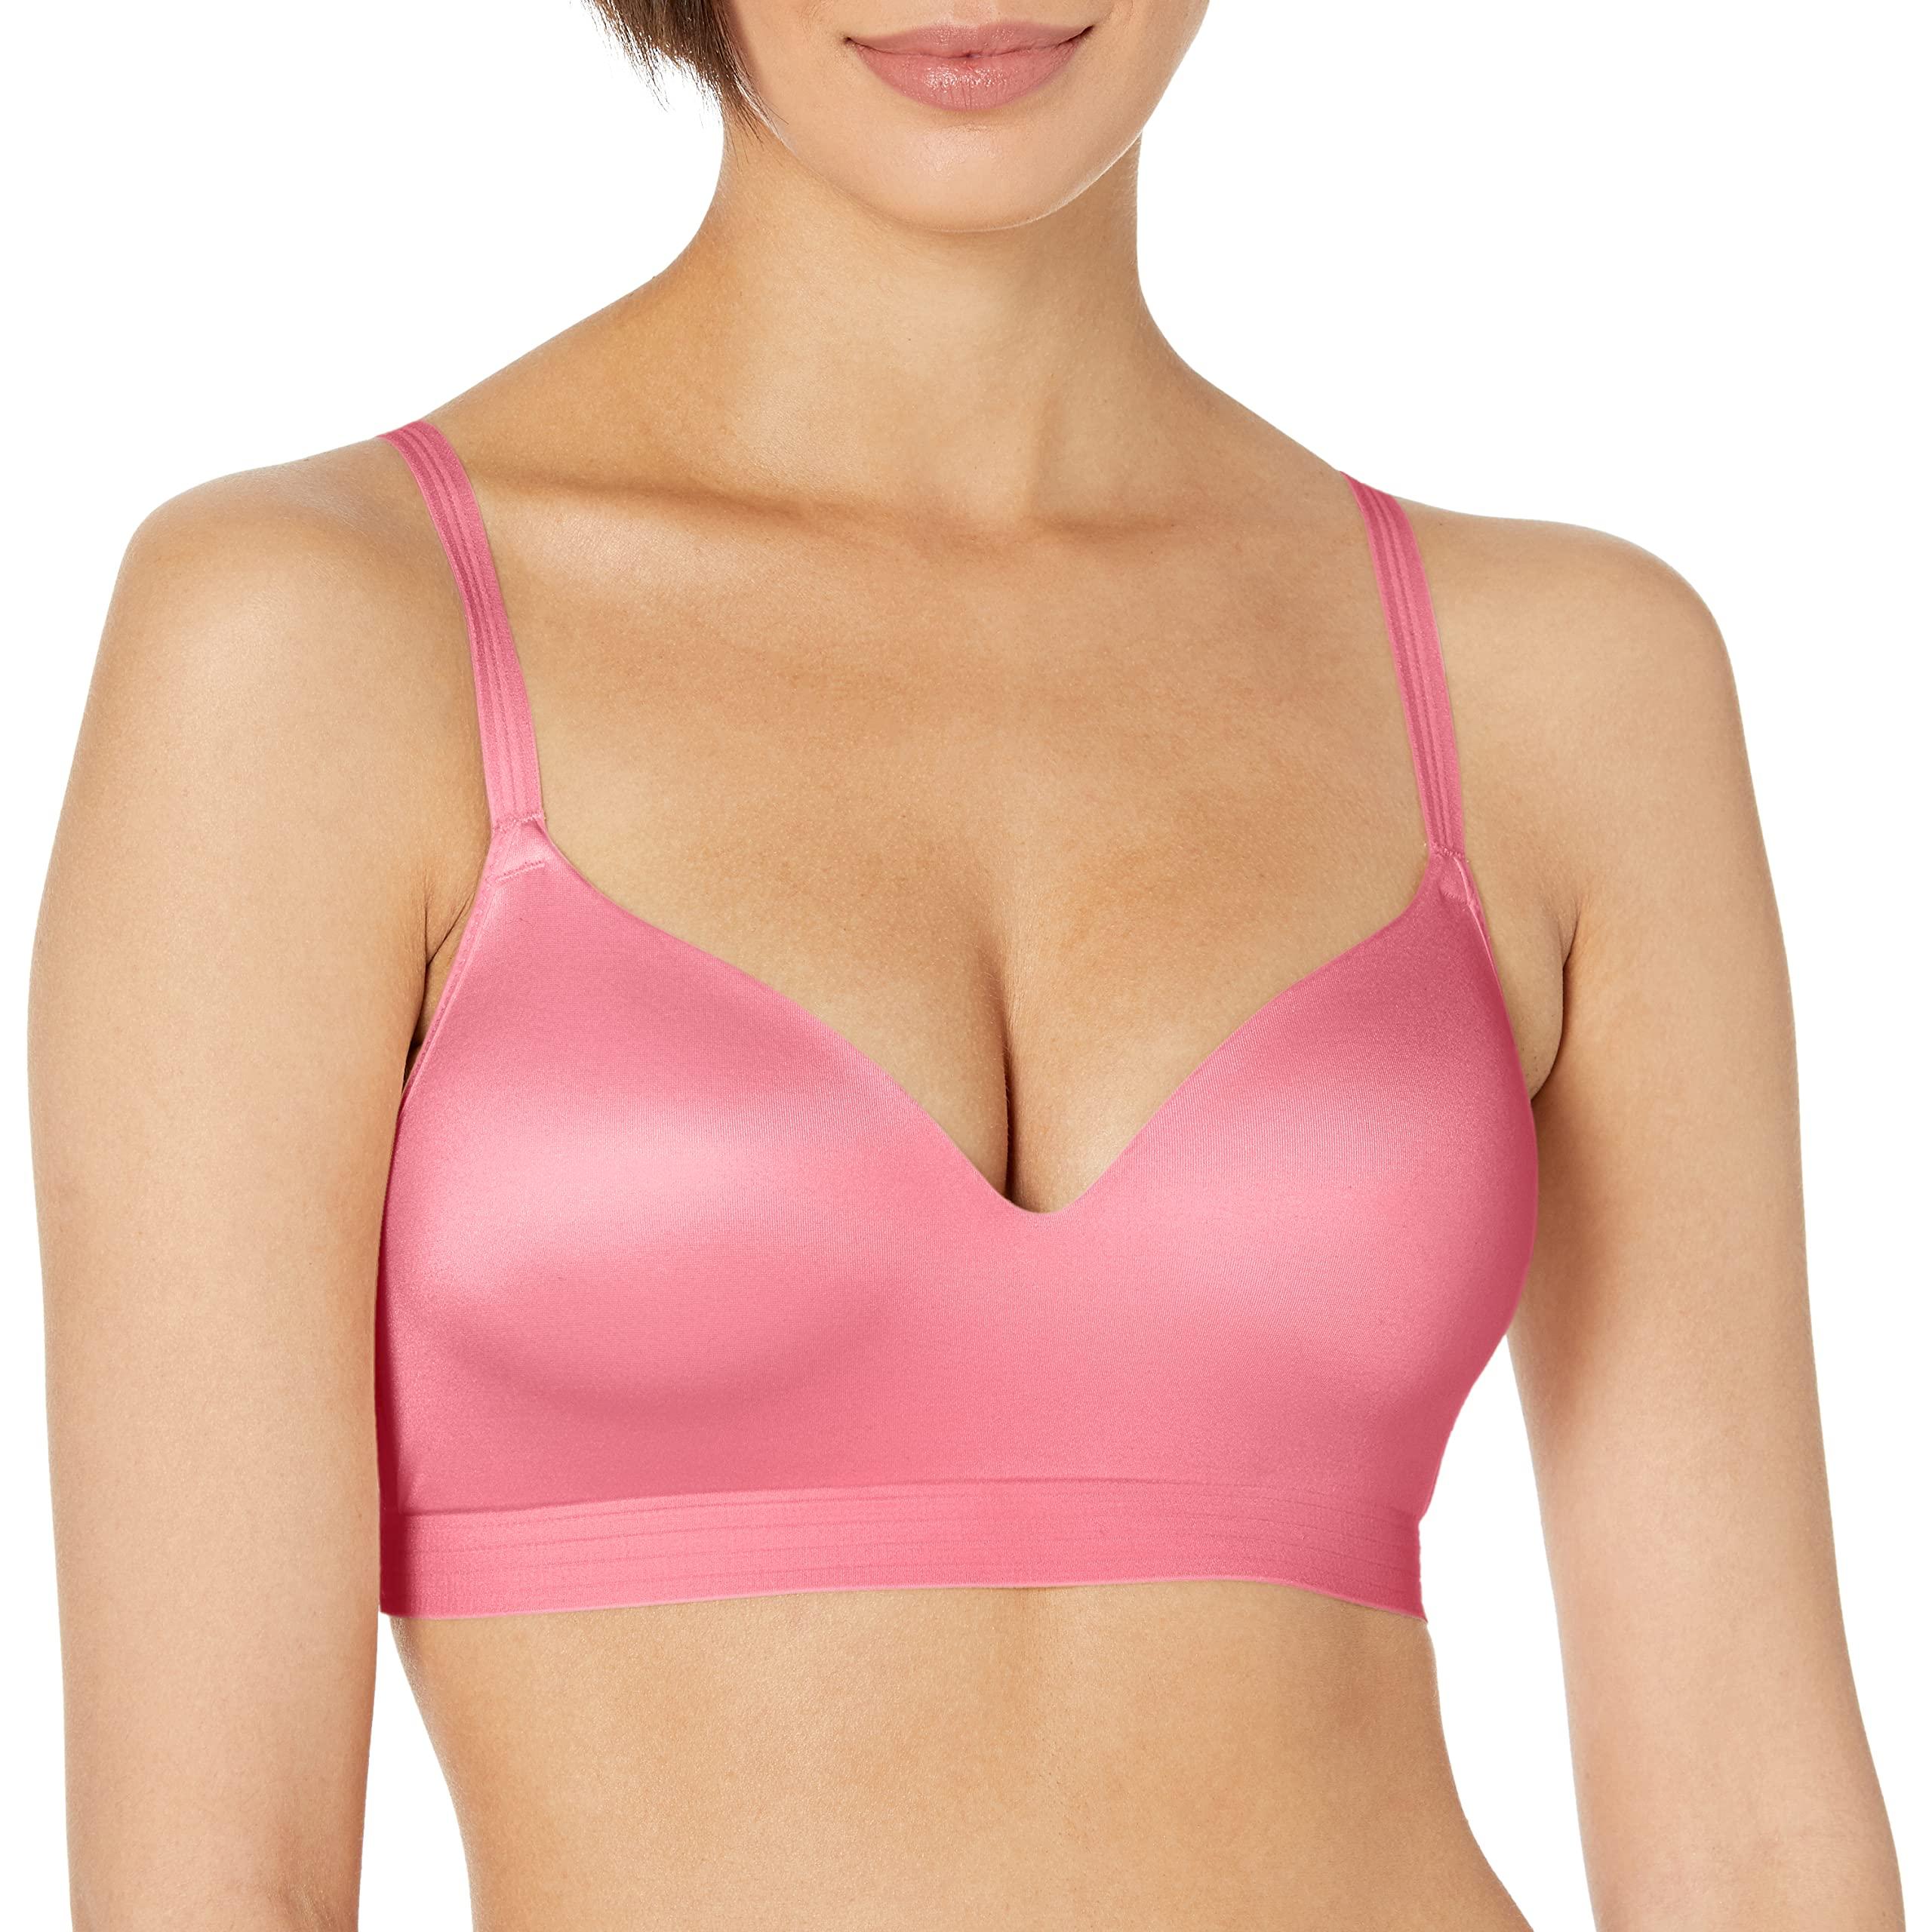 Buy Ultimate Women's No Dig Support SmoothTec Wireless Bra Dhhu35